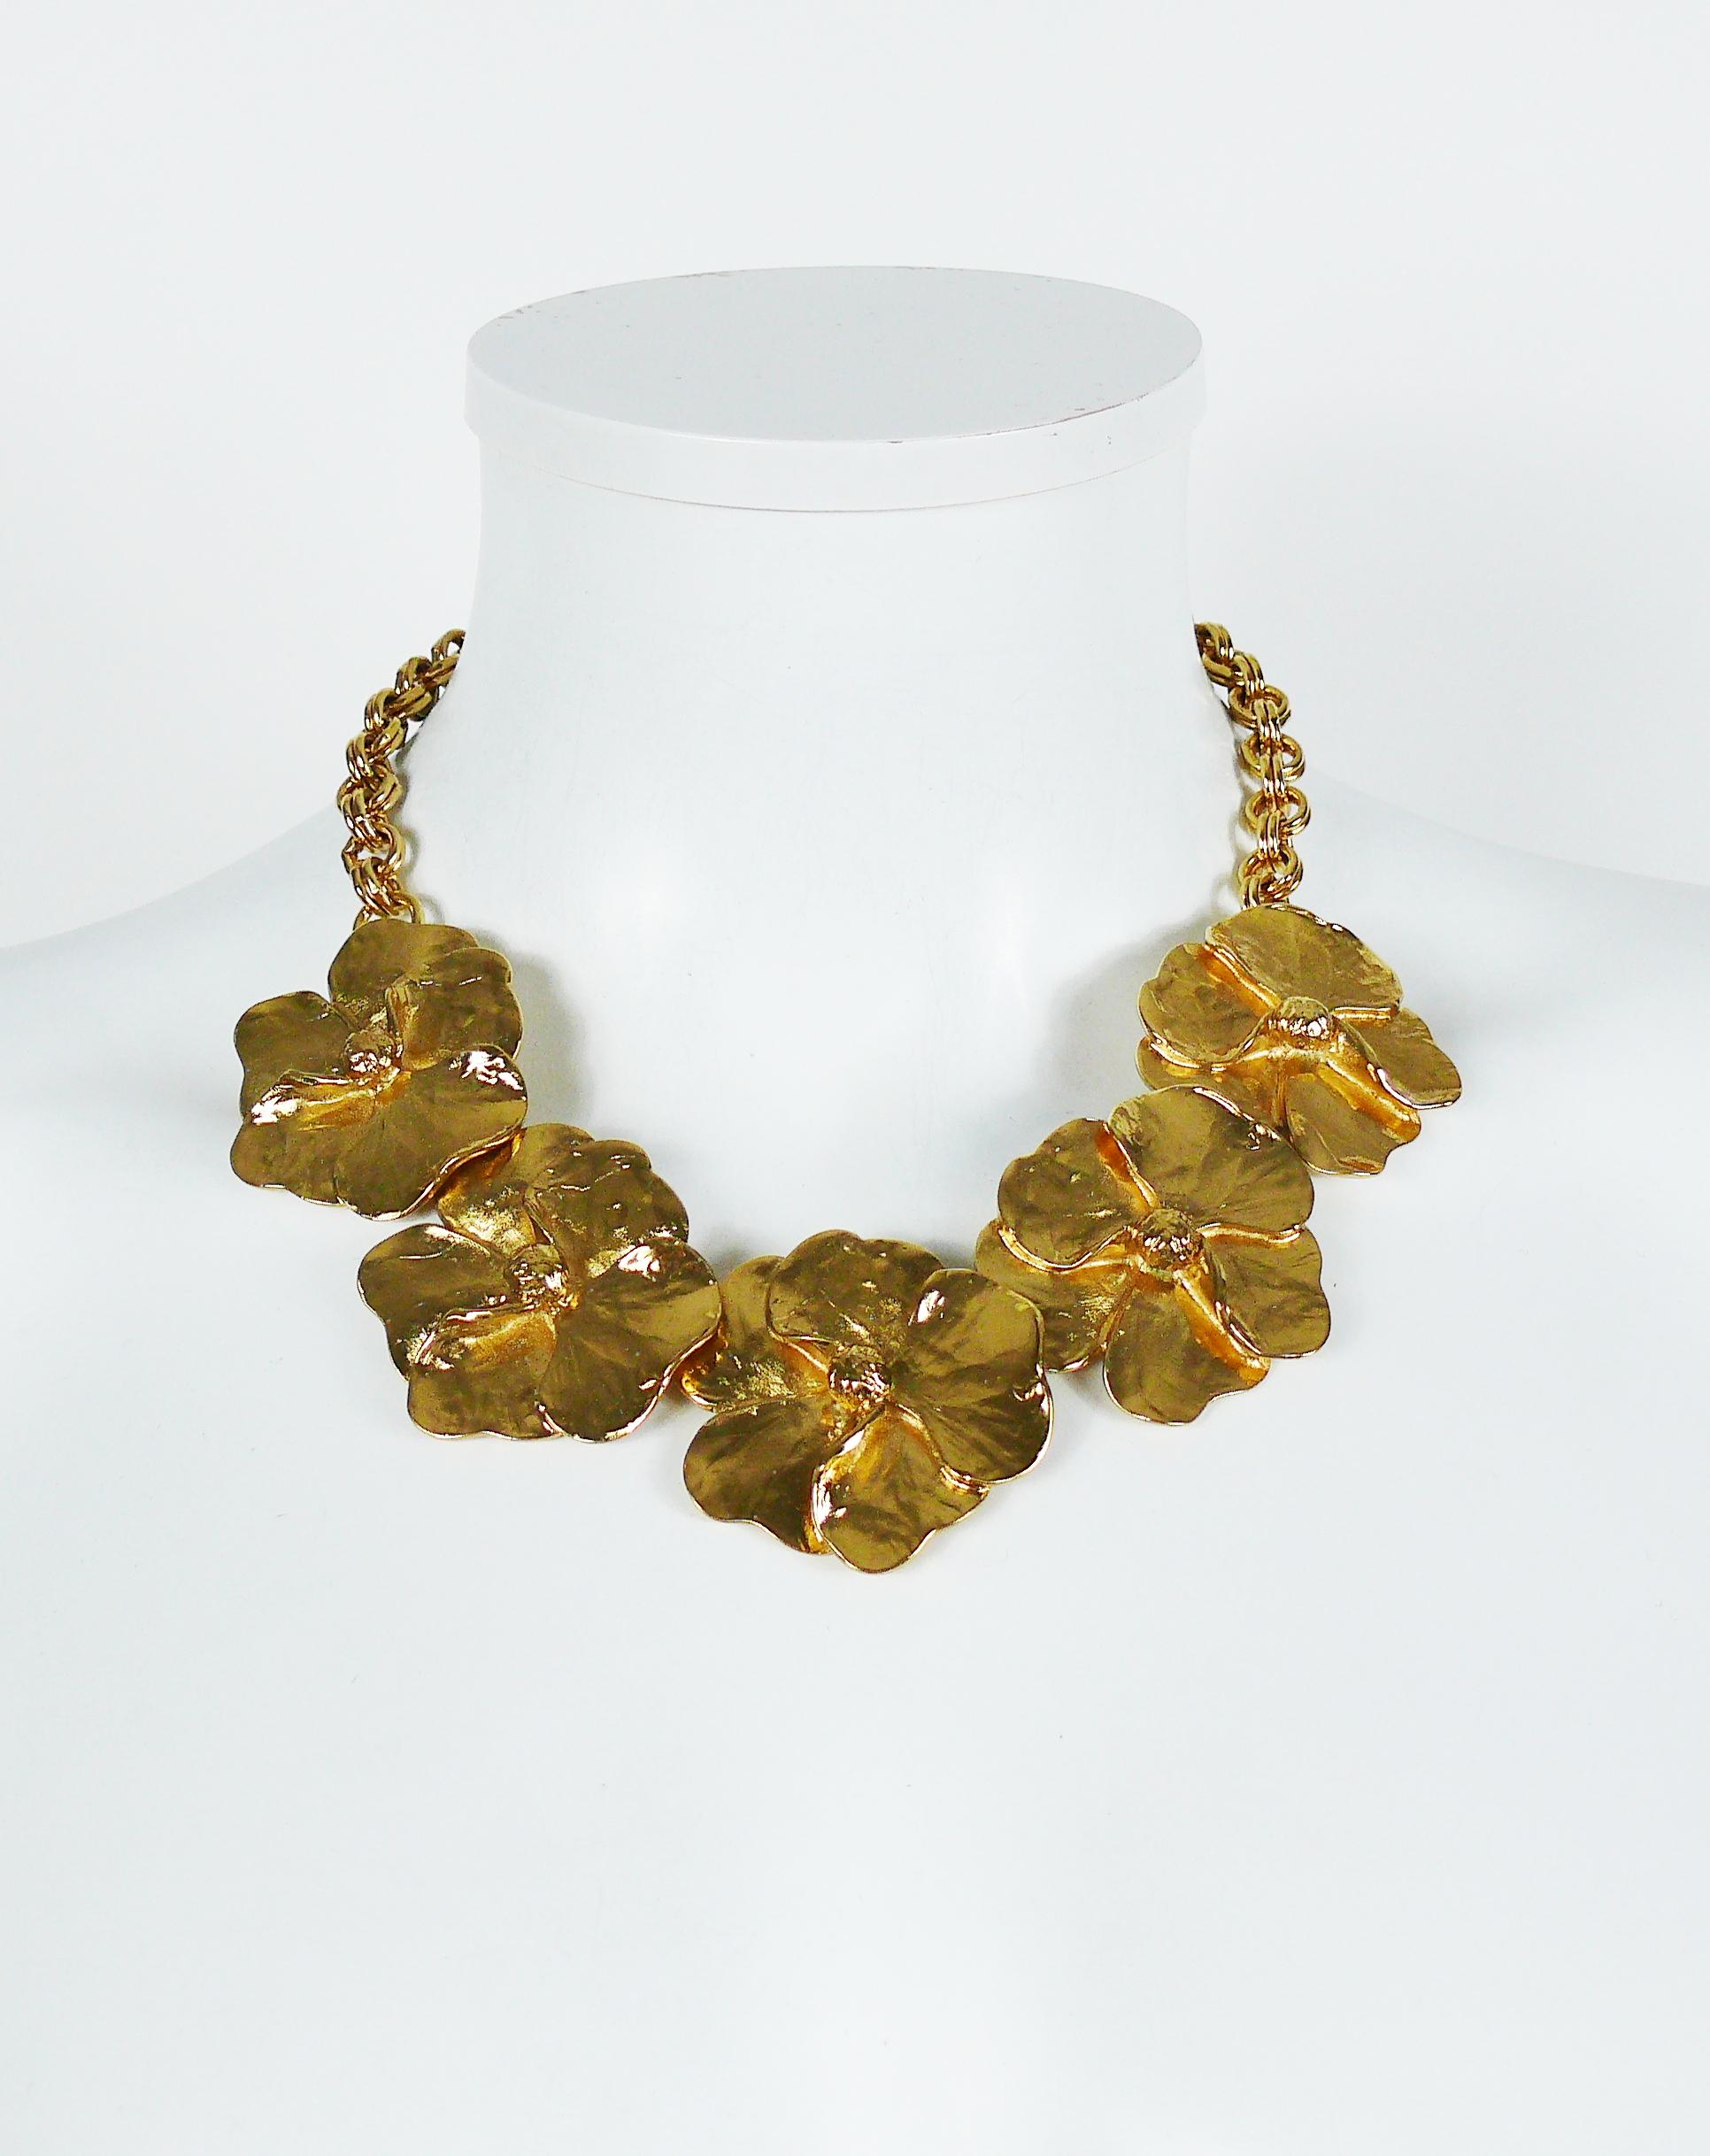 YVES SAINT LAURENT vintage gold toned floral necklace featuring five beautiful pansies.

T-bar closure.
Love heart clasps.

Marked YVES SAINT LAURENT.
Made in France.

Indicative measurements : total length approx. adjustable length from approx. 40